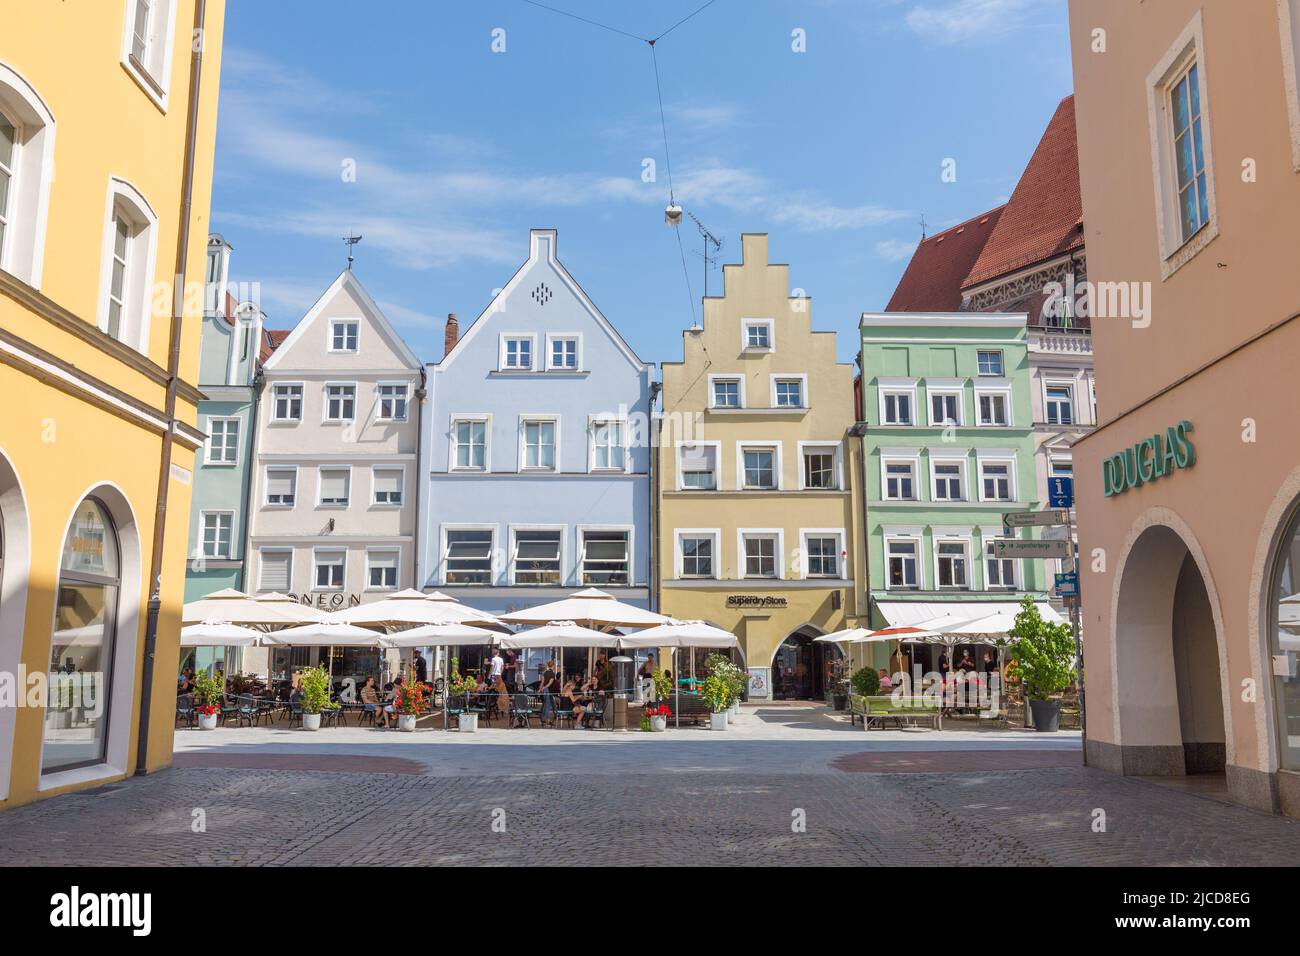 Landshut, Germany - Aug 15, 2021: Impressions from the old town (Altstadt) of Landshut. Colorful medieval house facades. Stock Photo